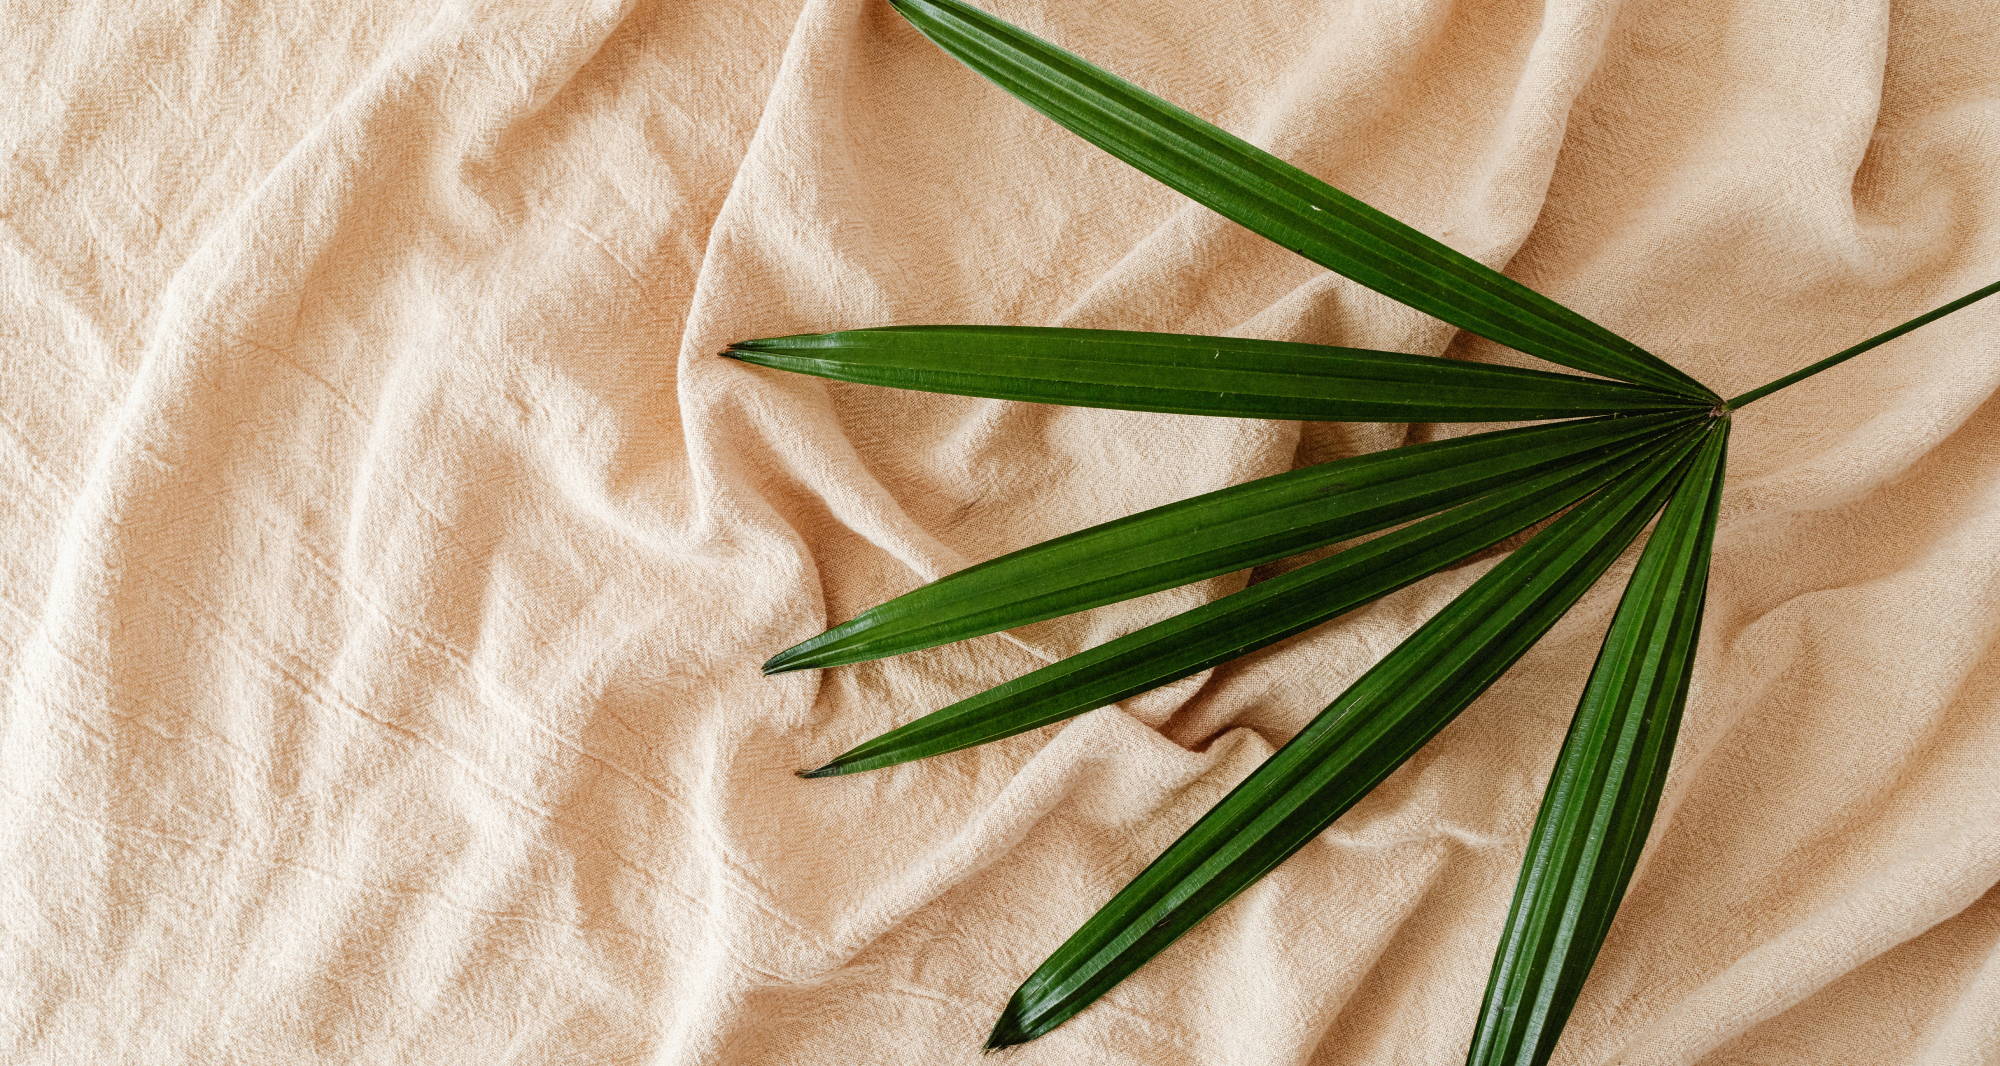 A green plant with six long skinny leaves lays askew on an off-white, wrinkled fabric.